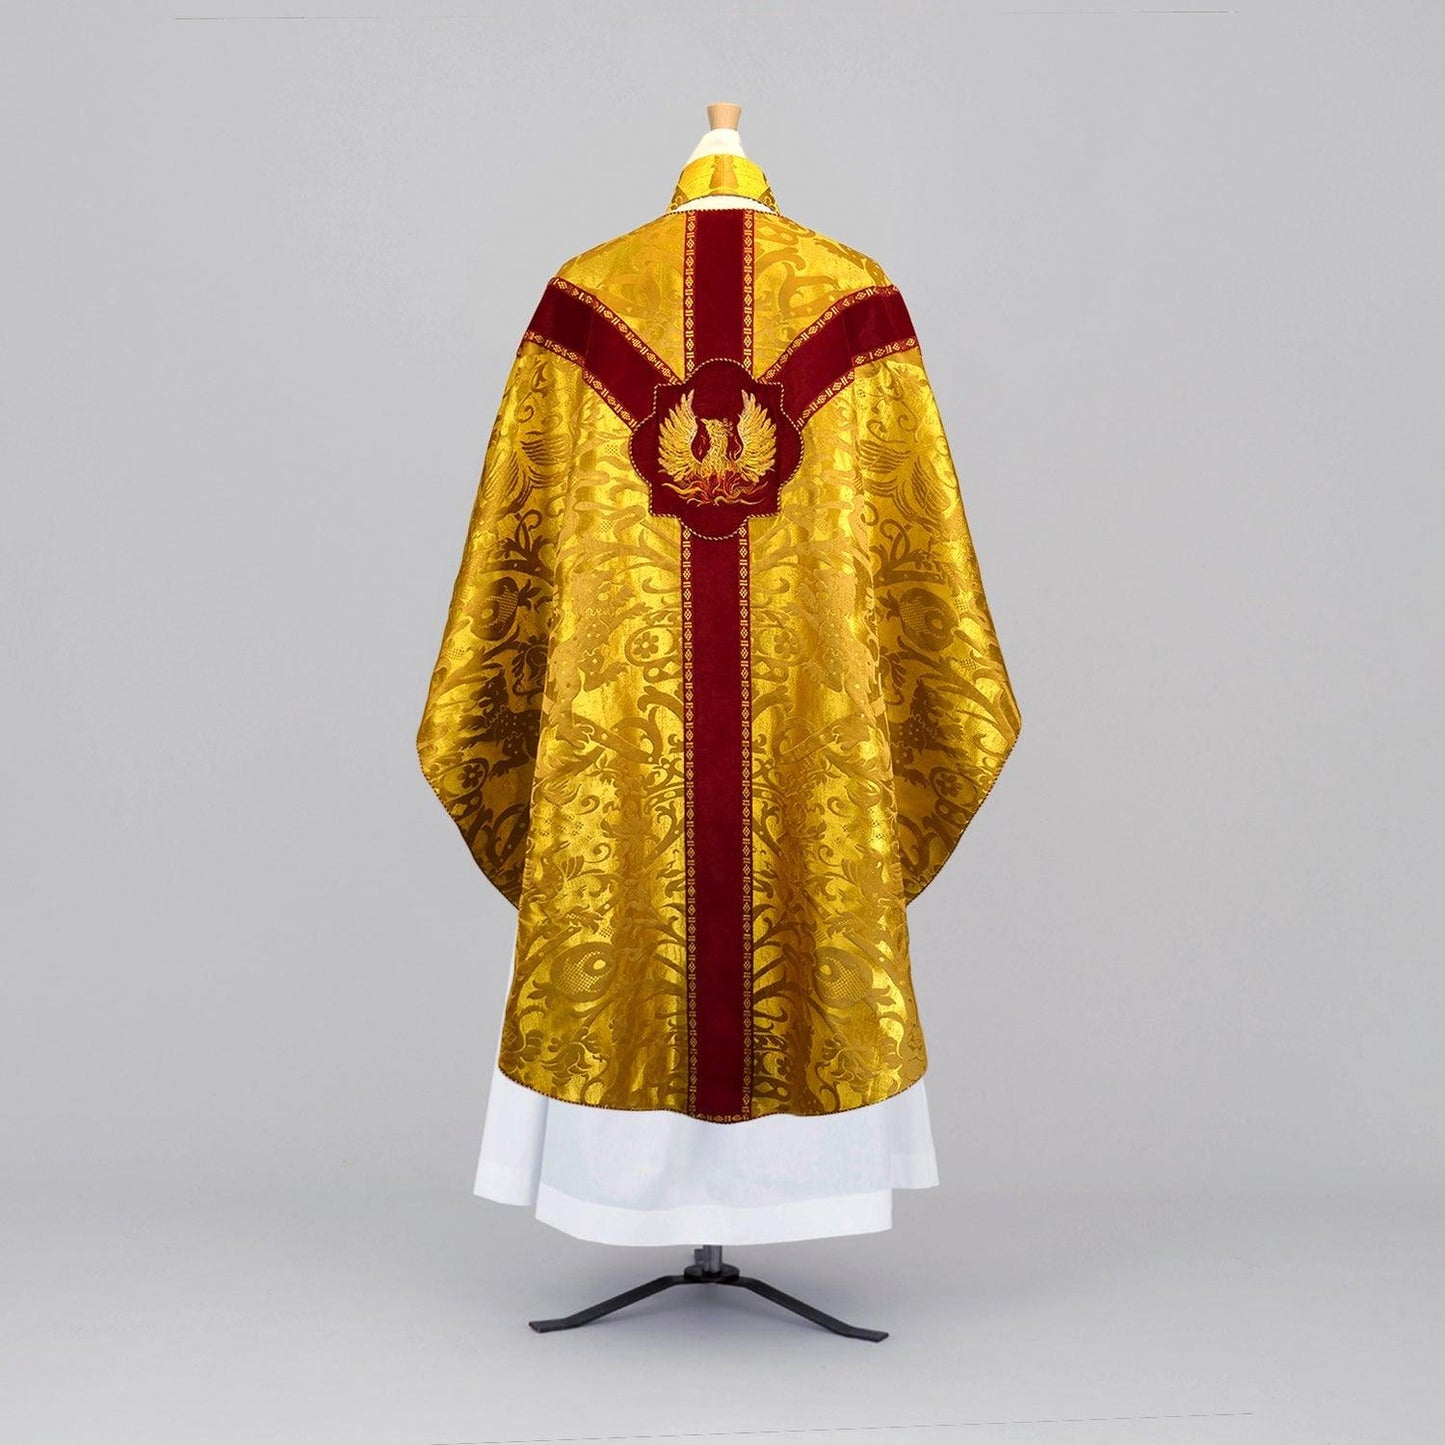 Semi-Gothic Chasuble in Gold 'Cannaregio' with Berry Velvet Orphreys and Phoenix Embroidery - Watts & Co.